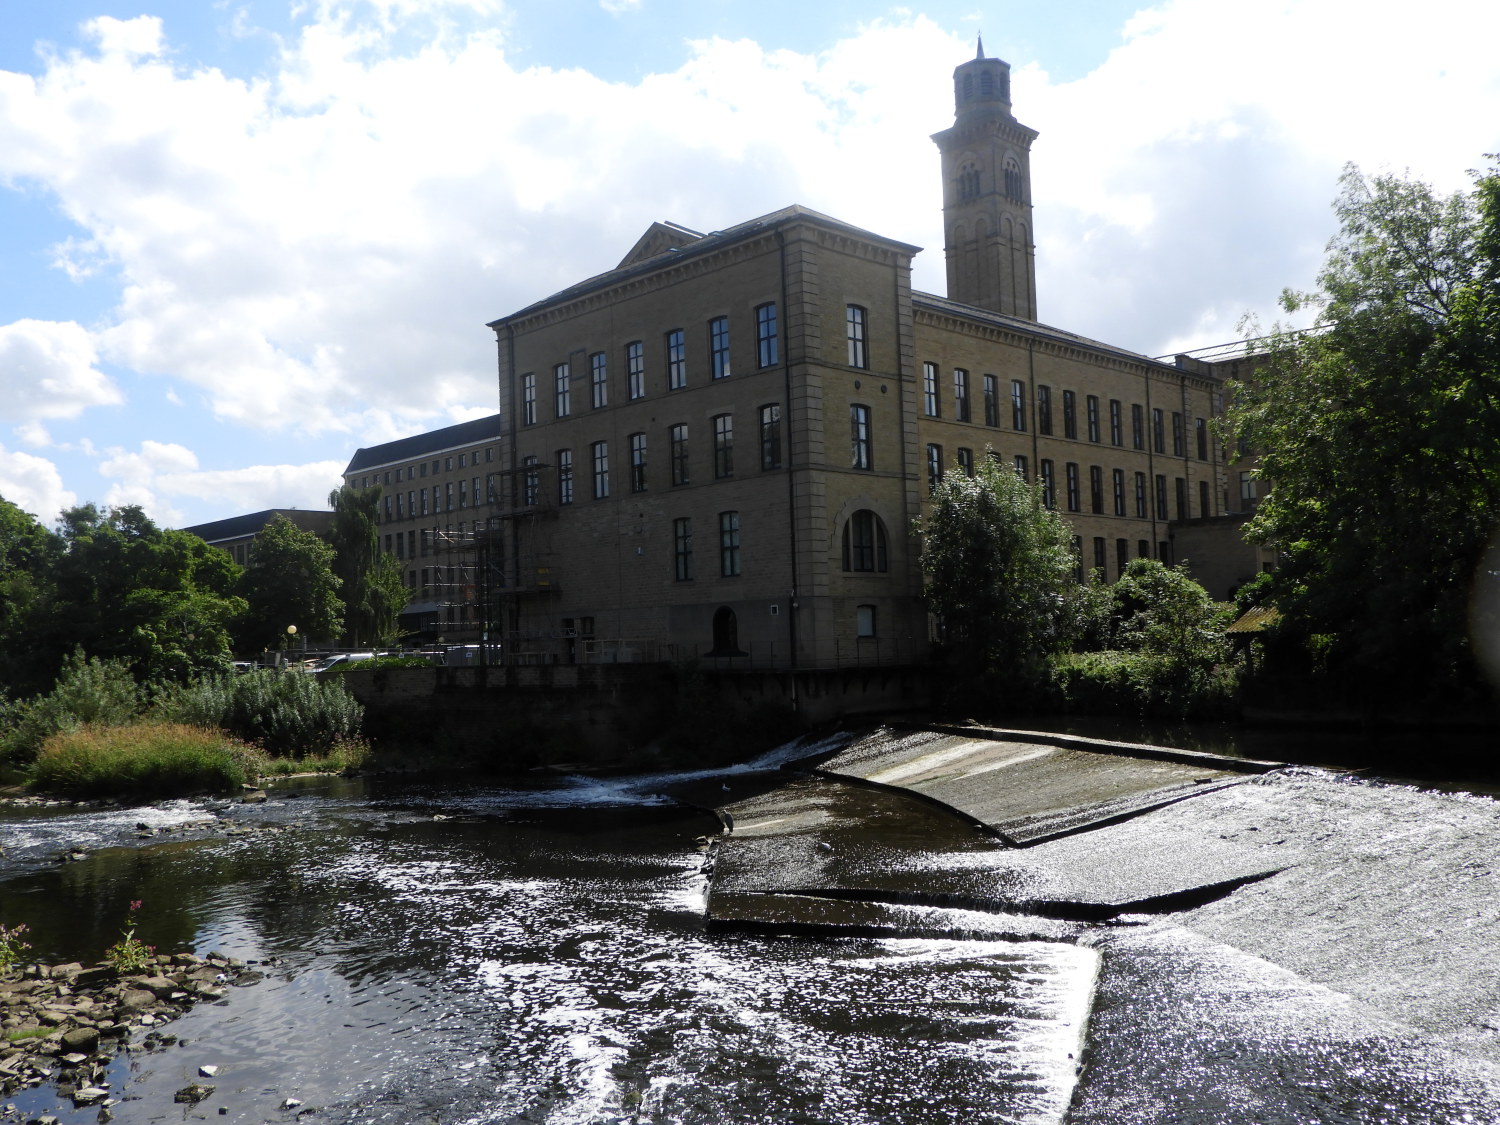 Weir on River Aire in Robert's Park